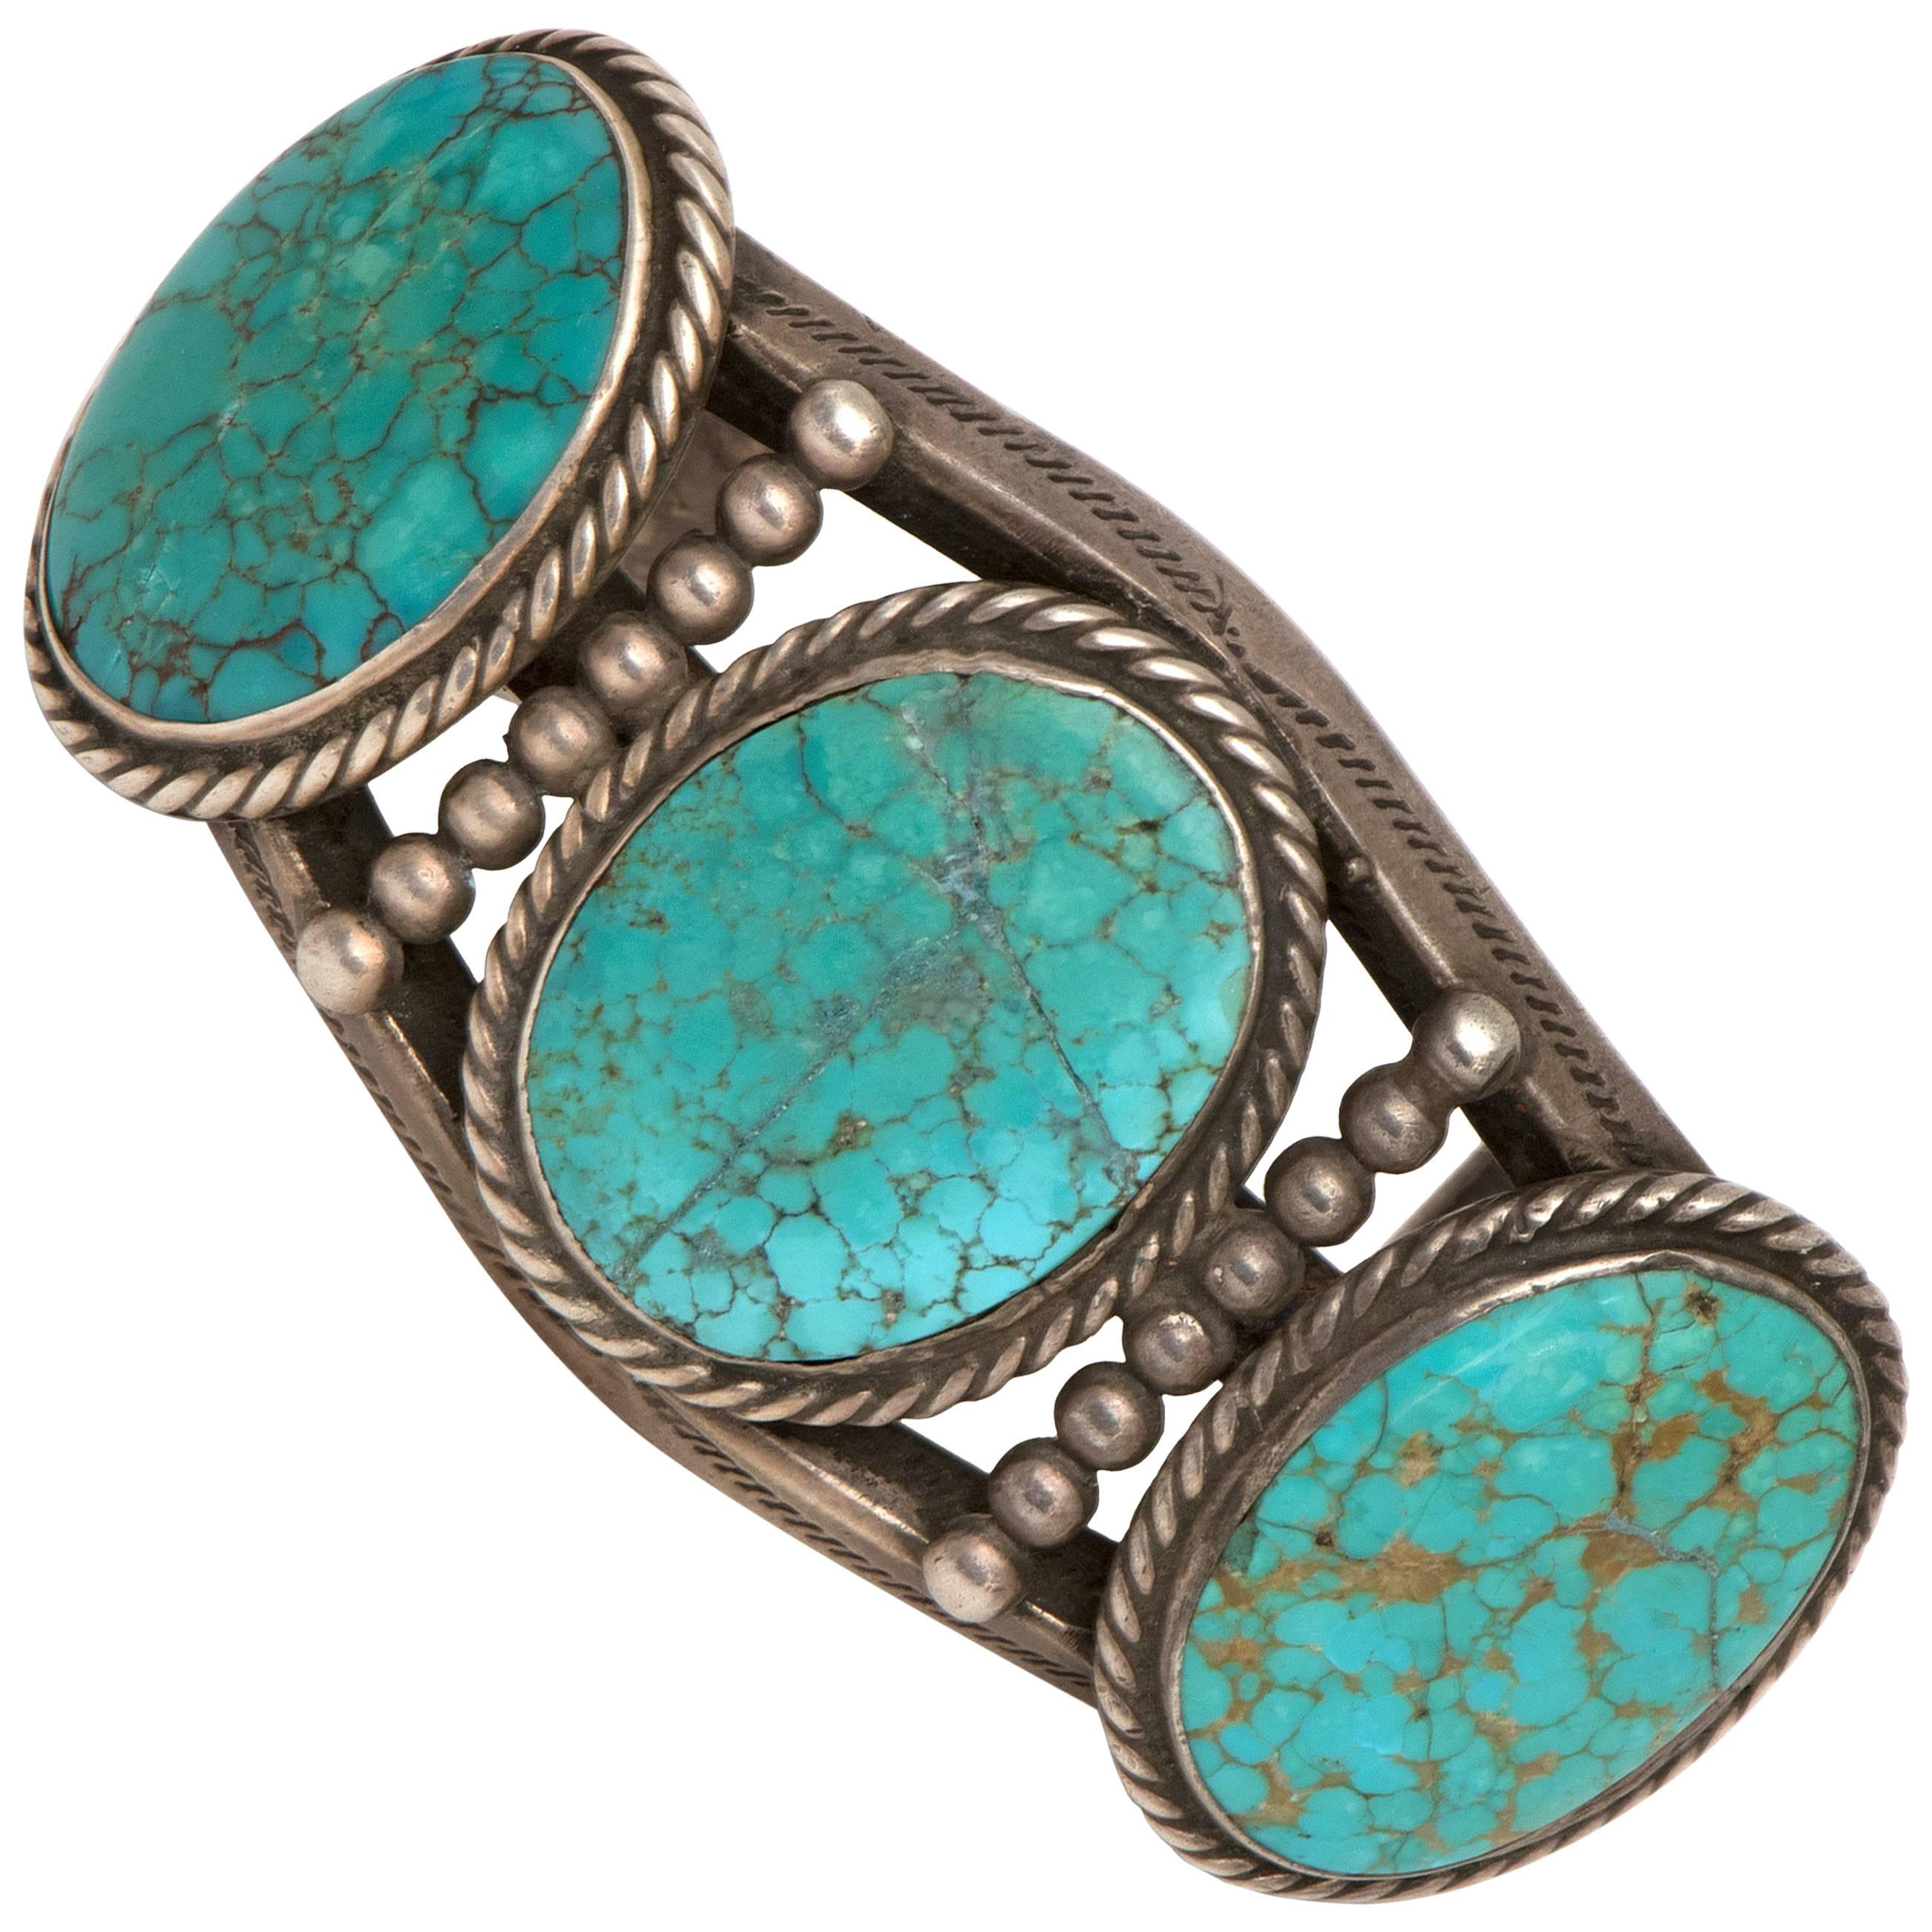 Vintage Old Pawn Navajo Bracelet with Silver and Turquoise, circa 1930